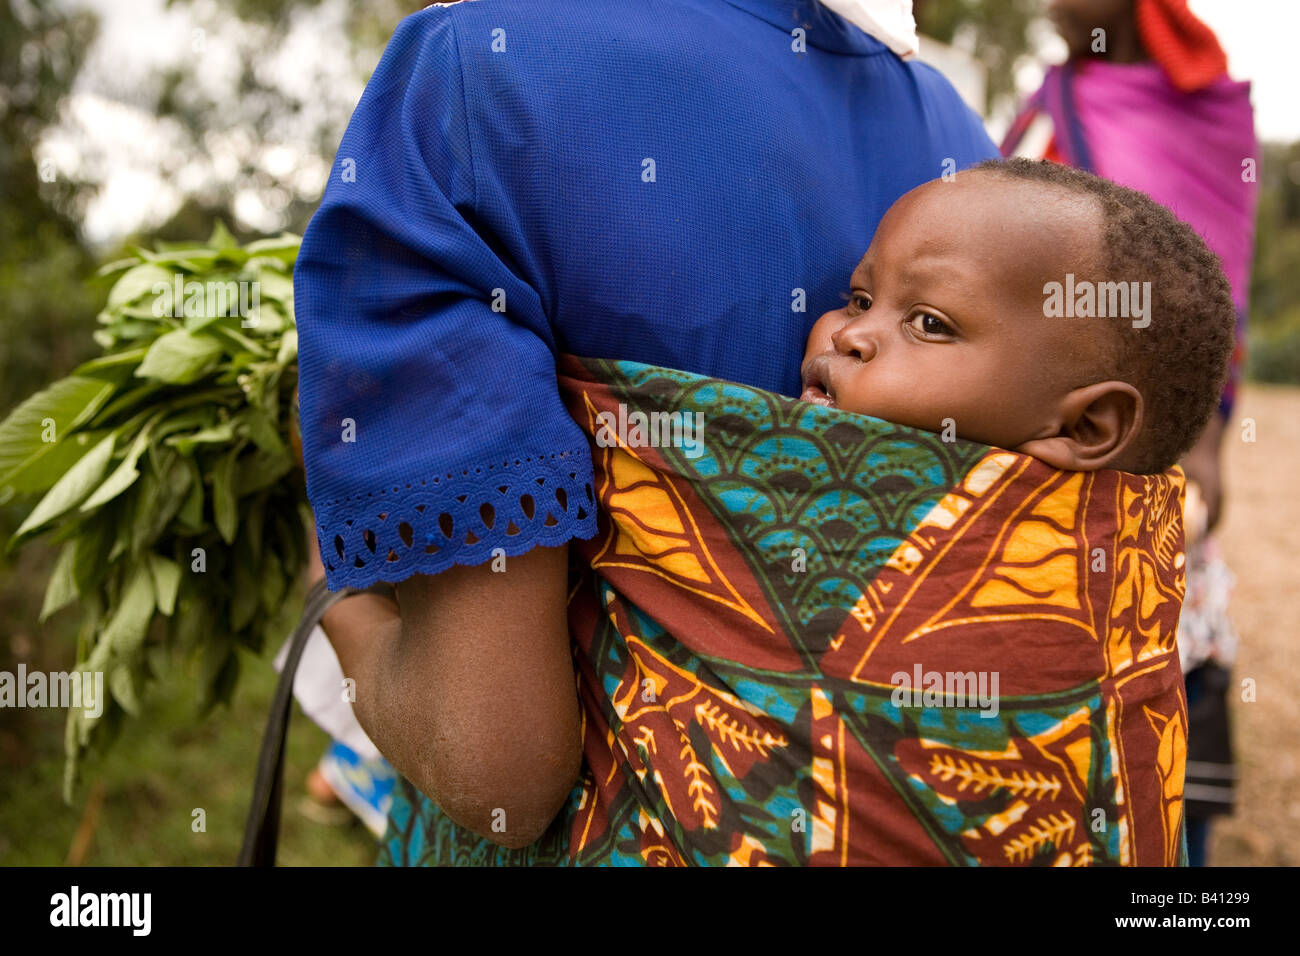 A Rwandan baby tied to its mother's back with a cloth called an "igitengeh  Stock Photo - Alamy